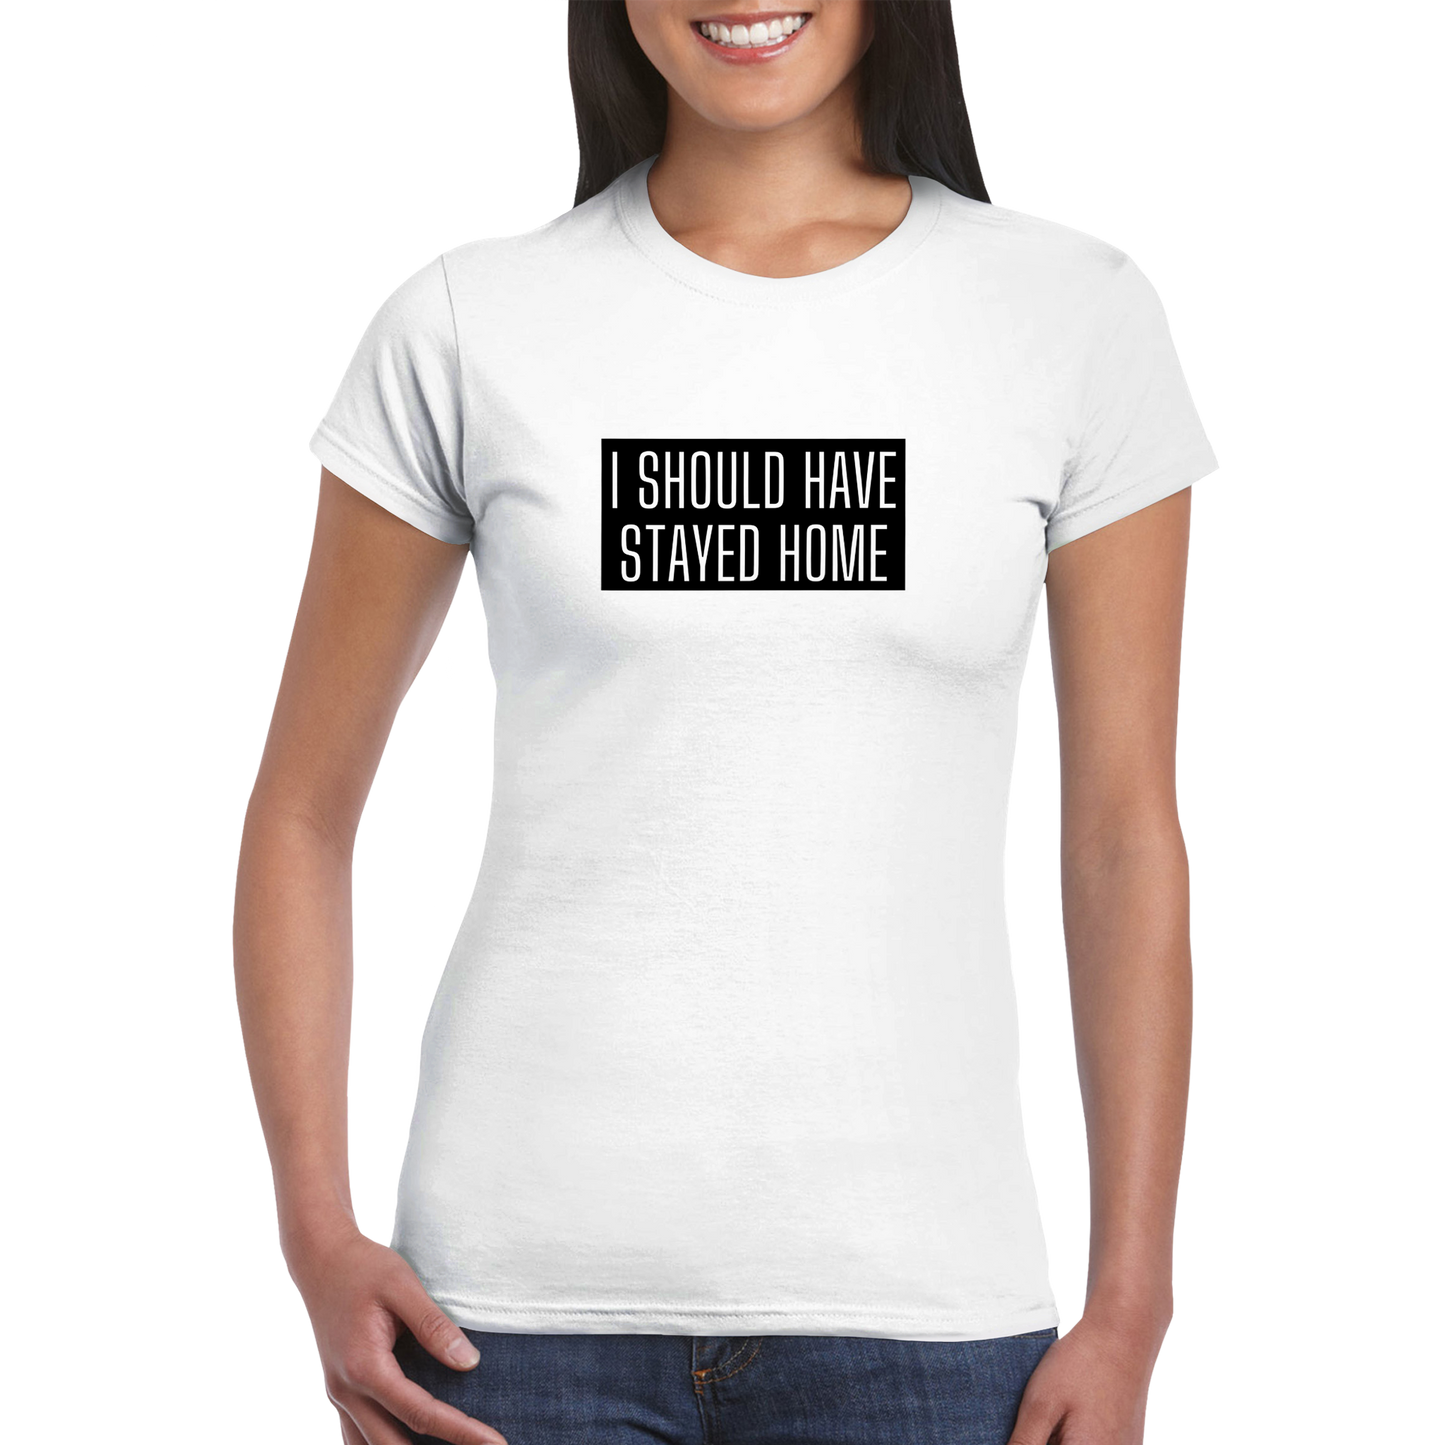 Should Have Stayed Home Classic Womens Crewneck T-Shirt